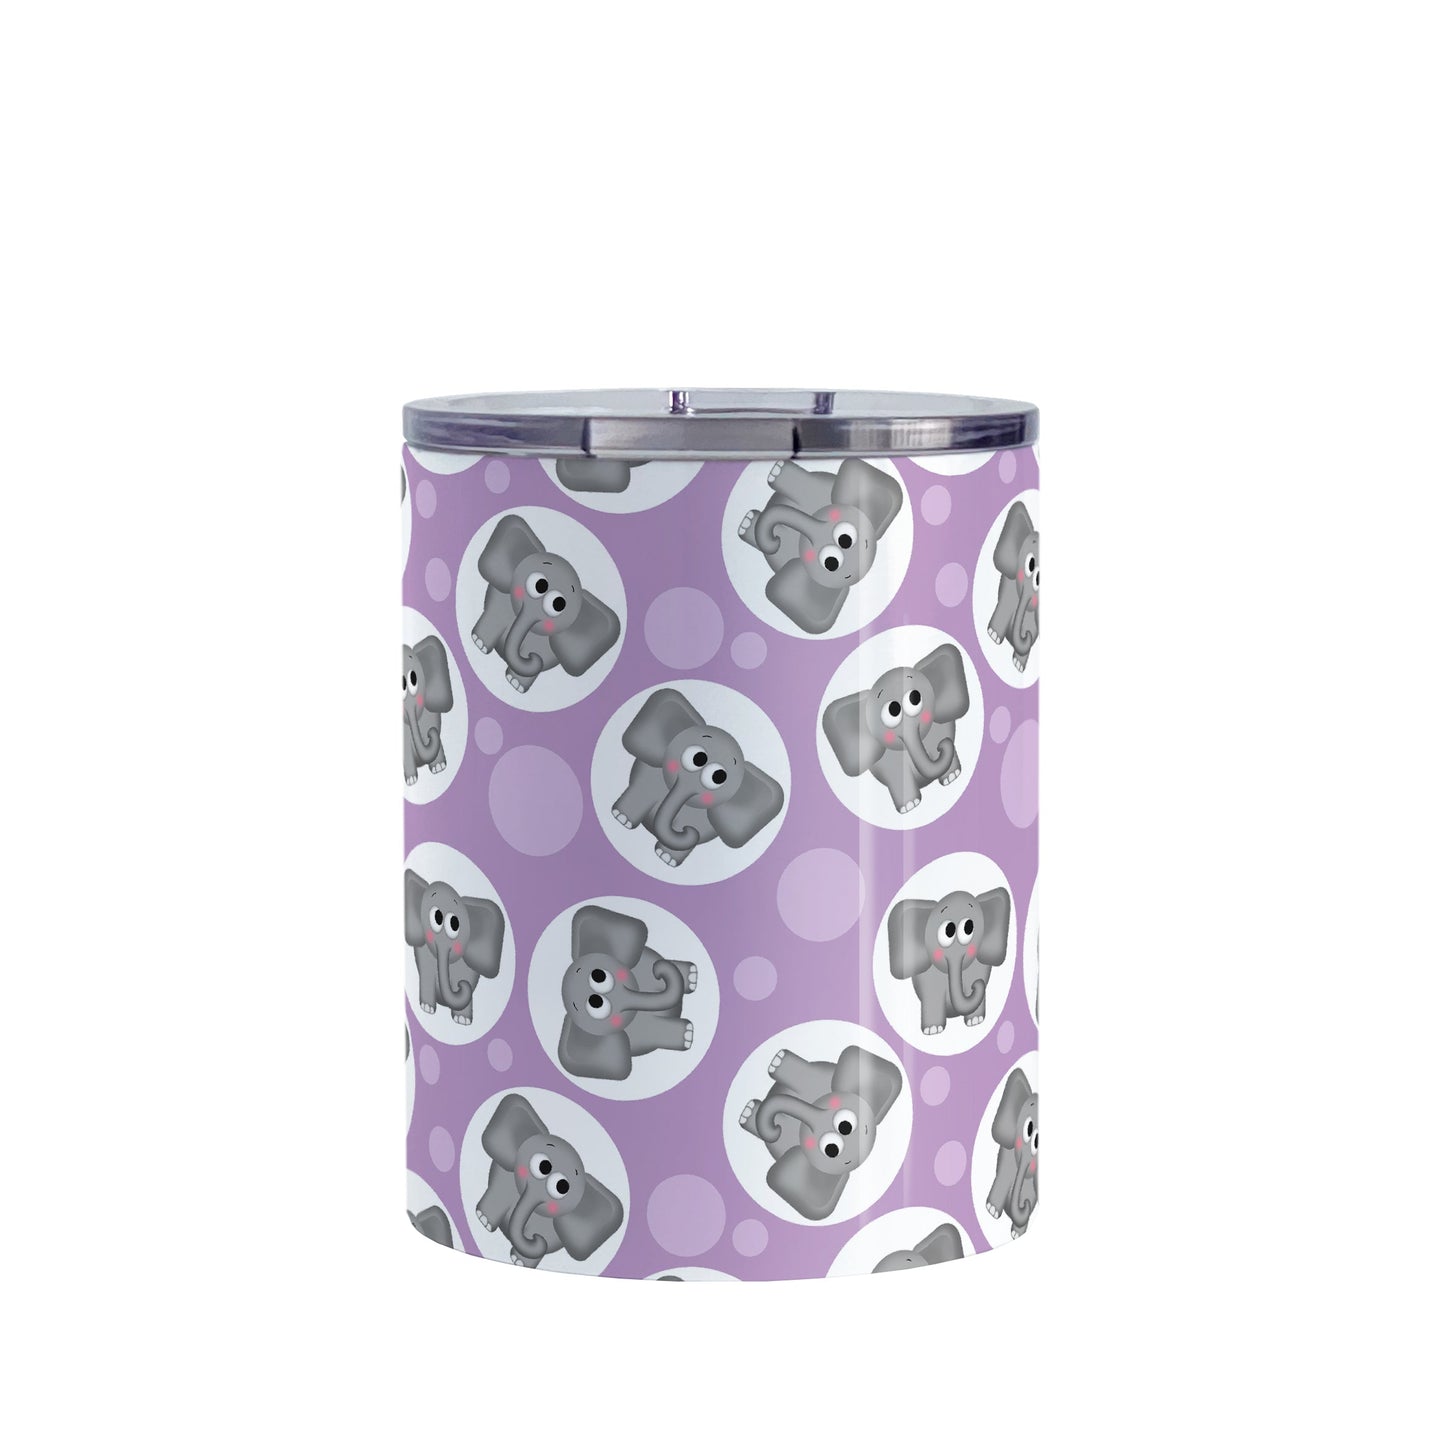 Cute Purple Elephant Pattern Tumbler Cup (10oz, stainless steel insulated) at Amy's Coffee Mugs